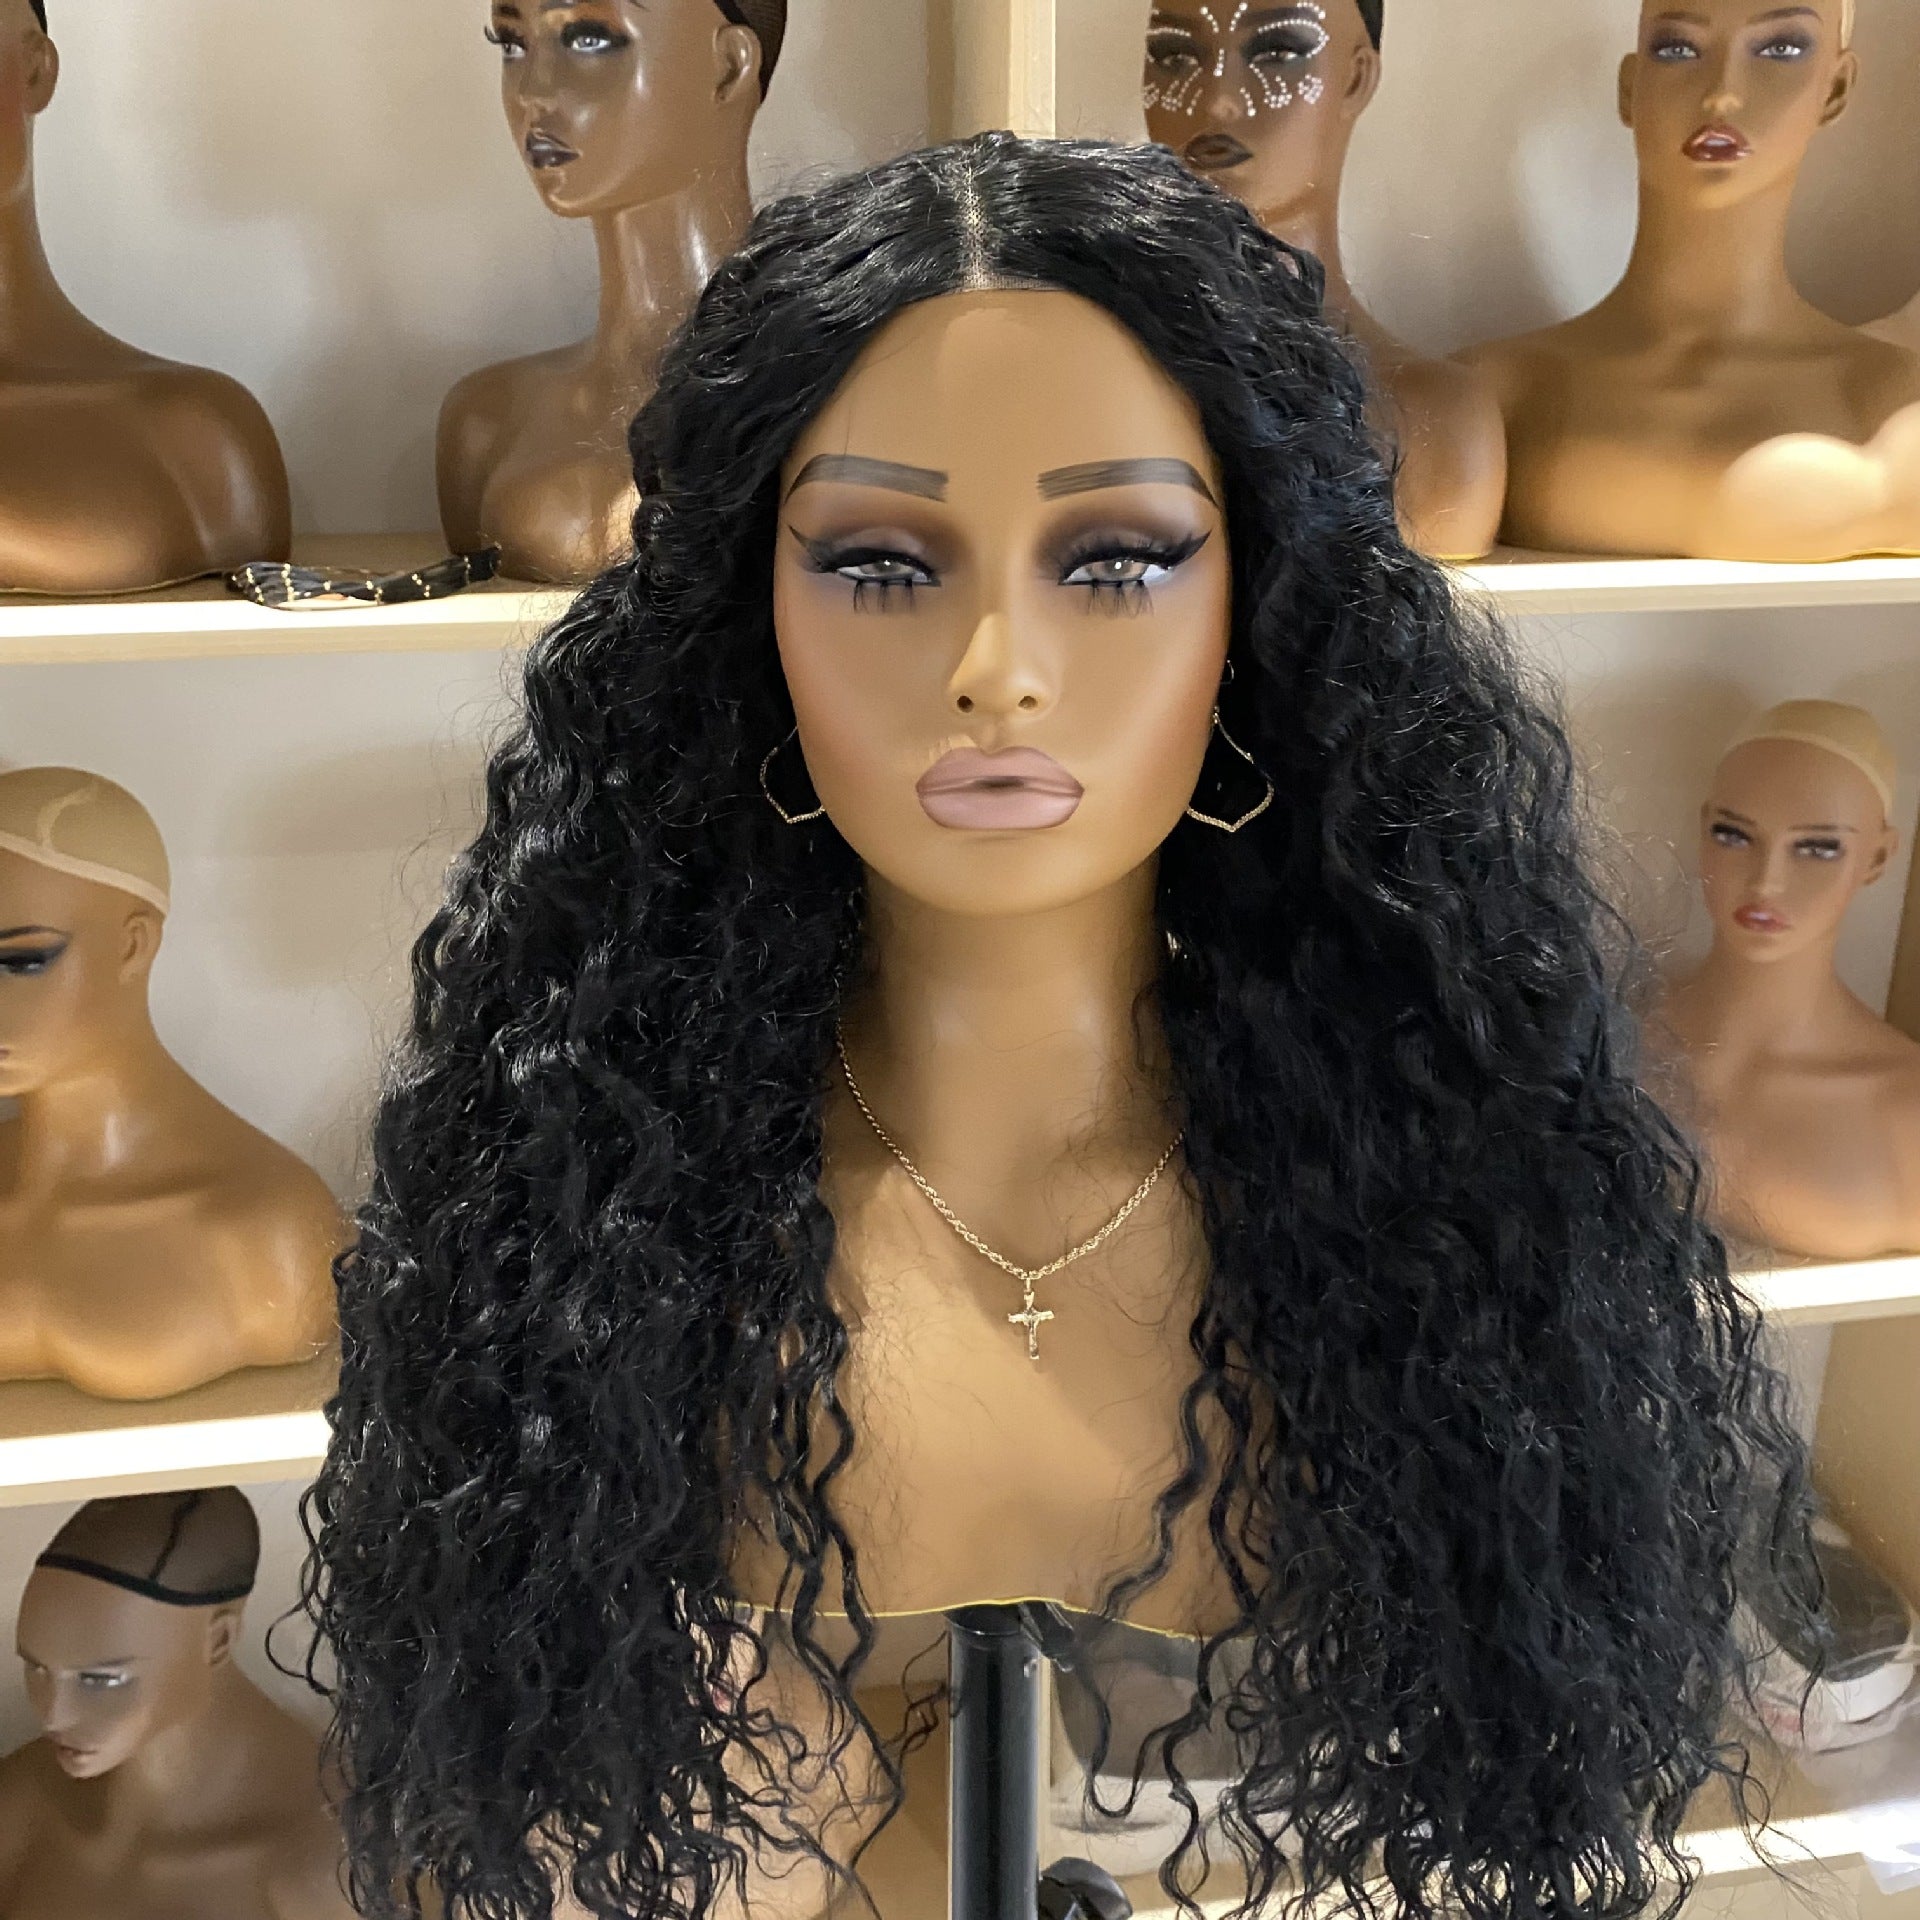 Head Bust Mannequin with Wig Accessories for Photoshoot